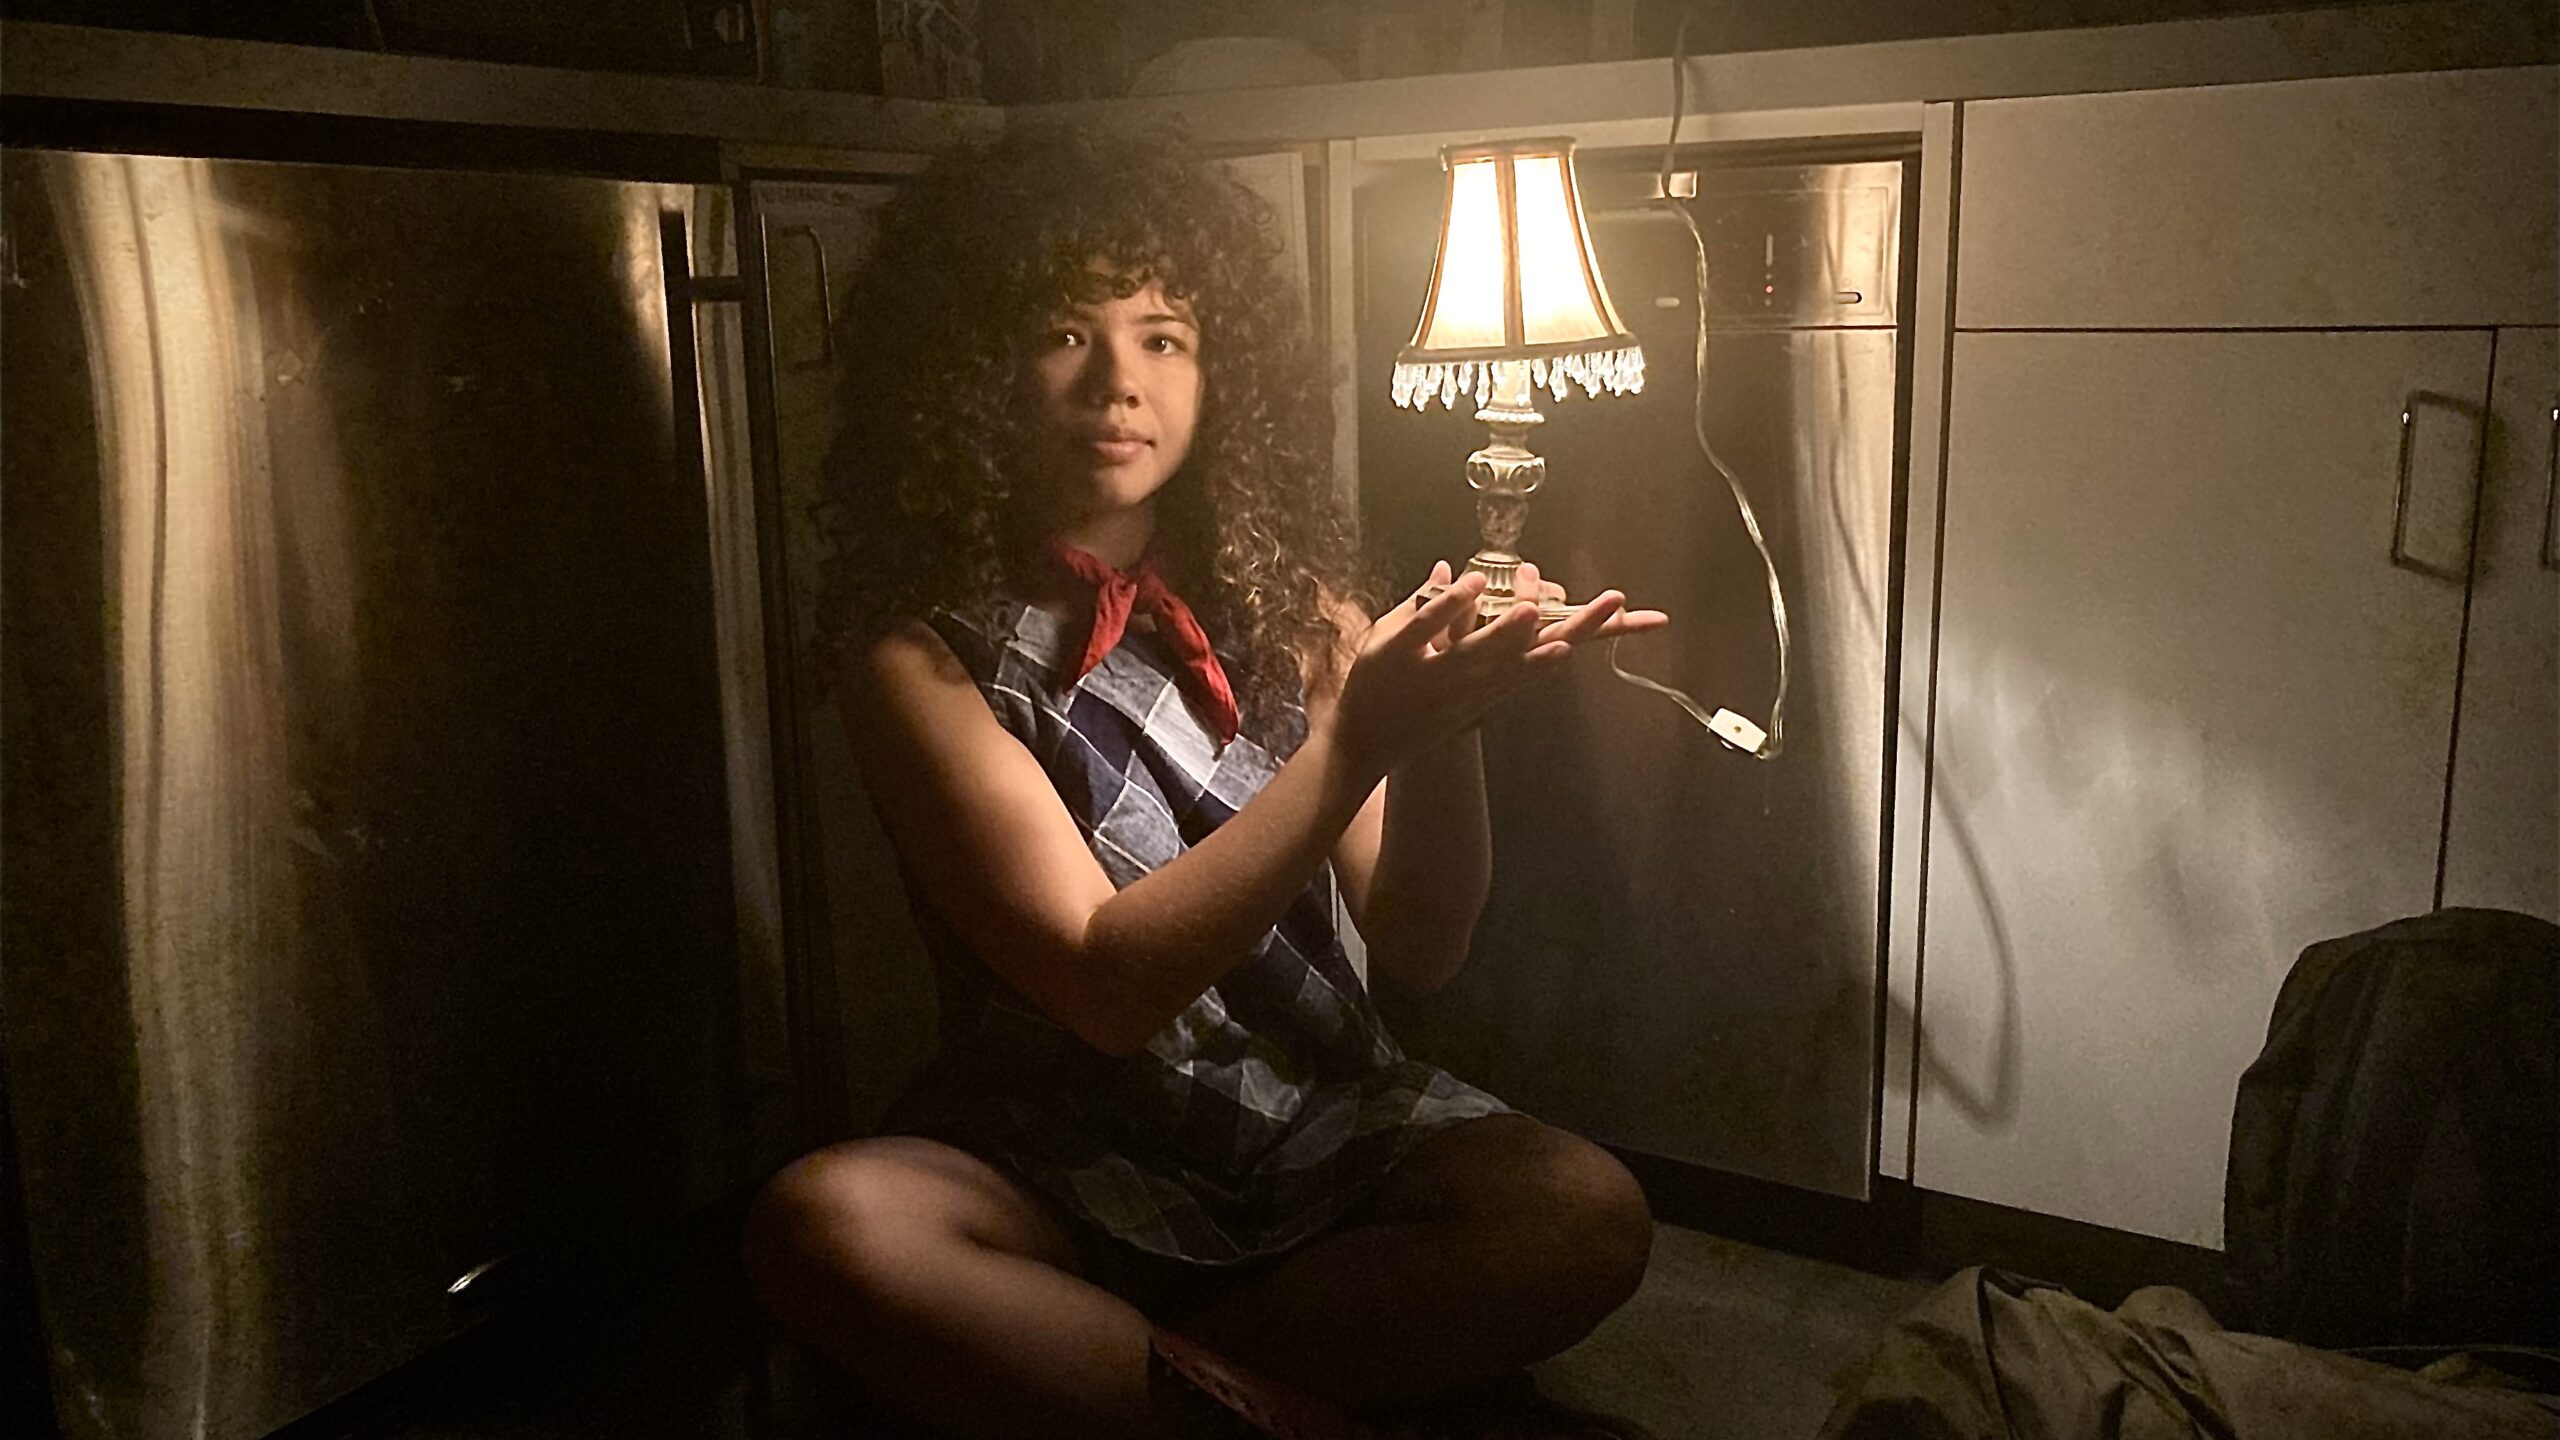 Image of Lamp Club founder Jackie McVorran sits criss cross on the floor of the Lang pantry, leaning against a dishwasher and a cabinet door. She is sporting a red necktie and blue geometric patterned dress, and she gazes into the camera, illuminated by the glow of the miniature lamp she’s holding.